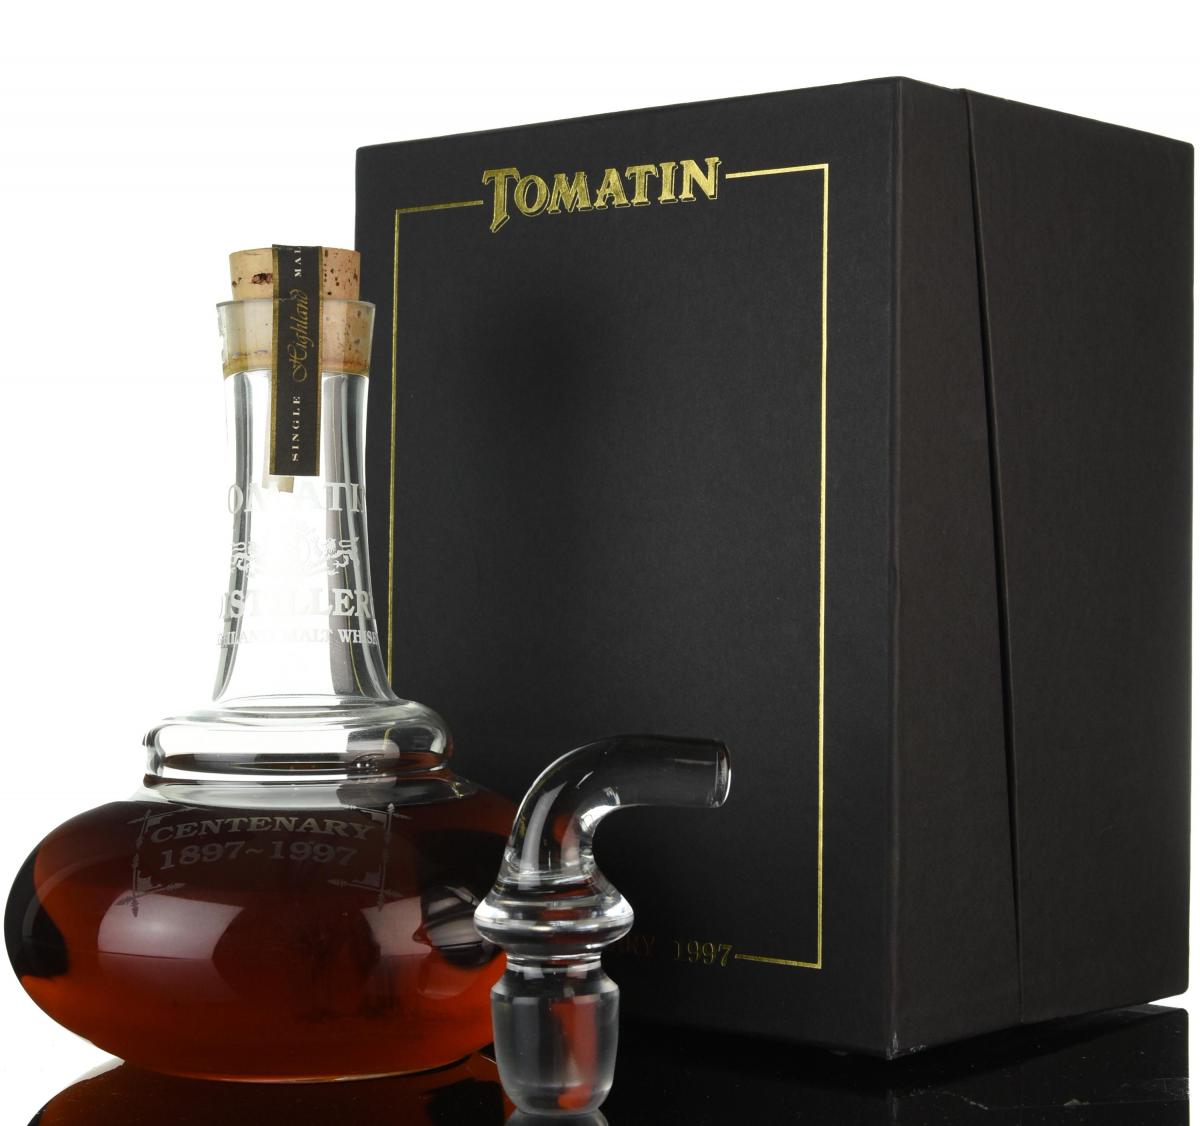 Tomatin Centenary 30 Year Old - 1897-1997 - 70cl